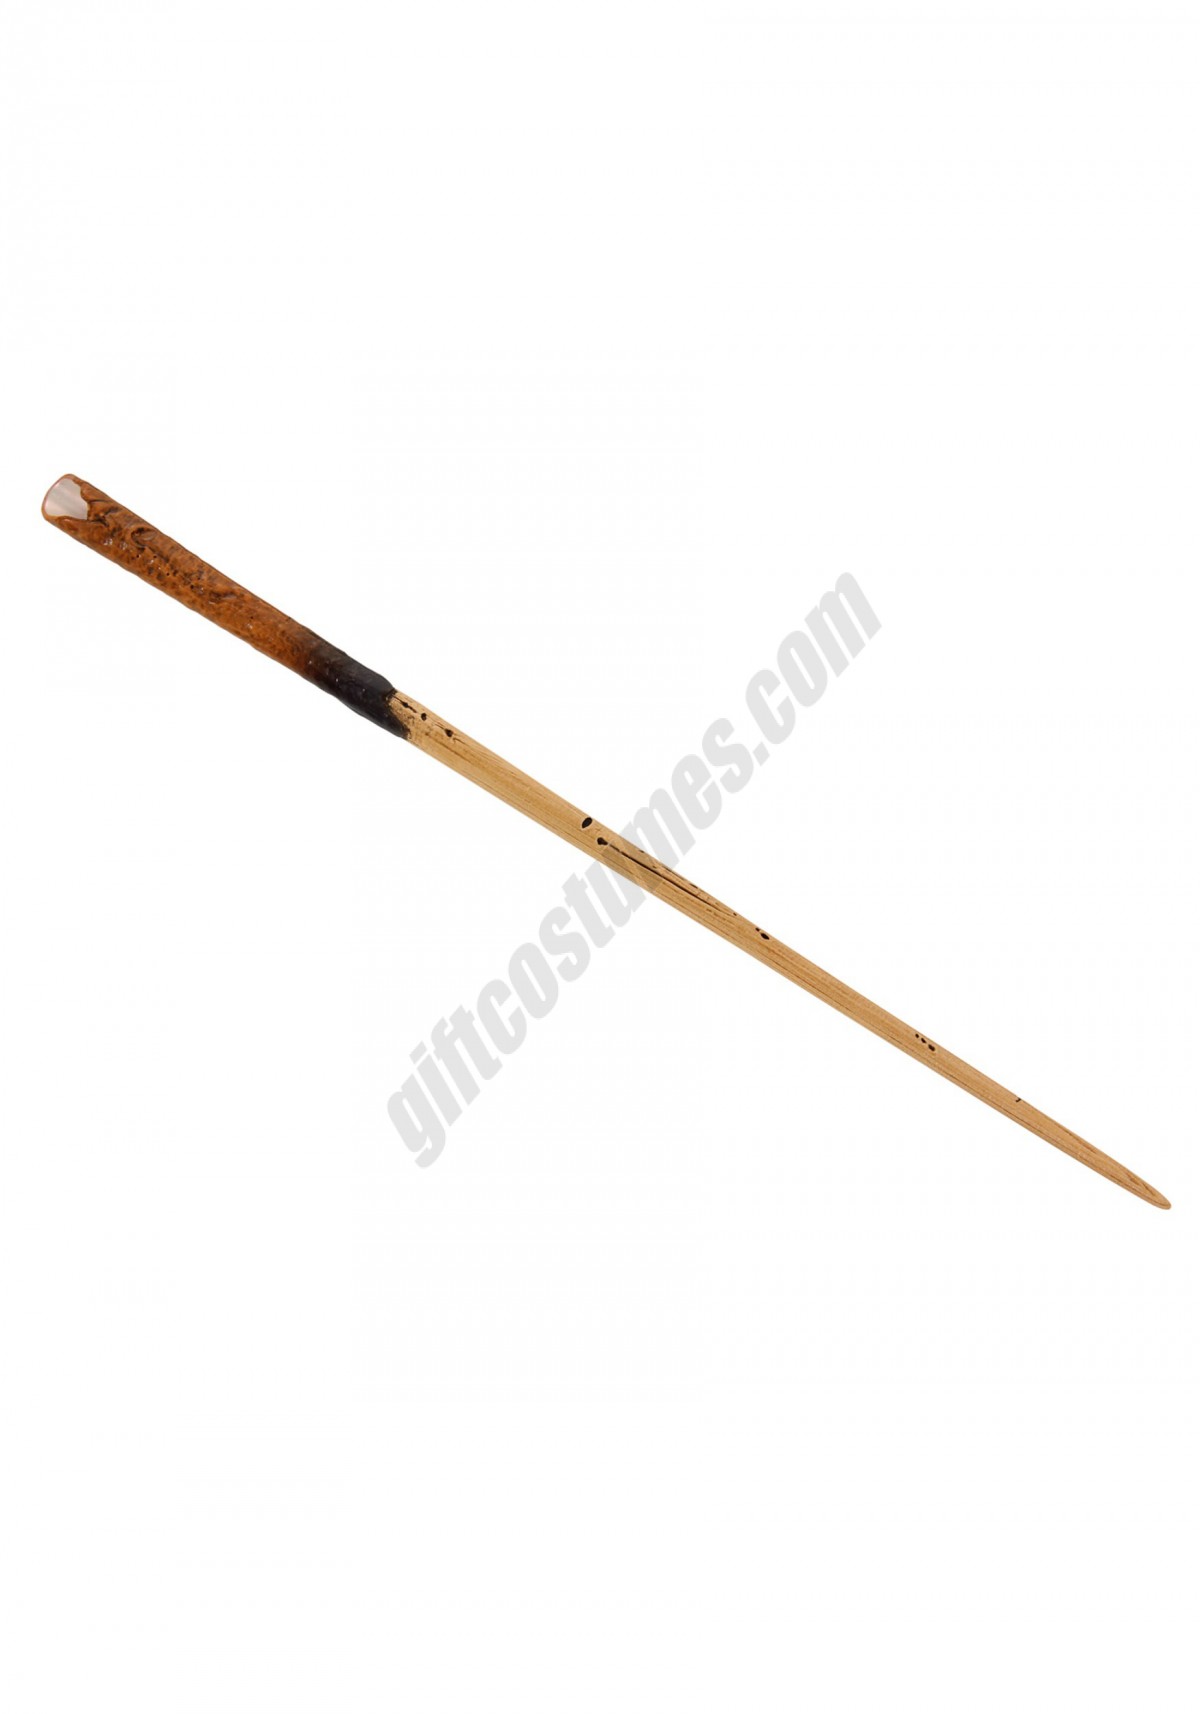 Newt Scamander Wand Promotions - -0